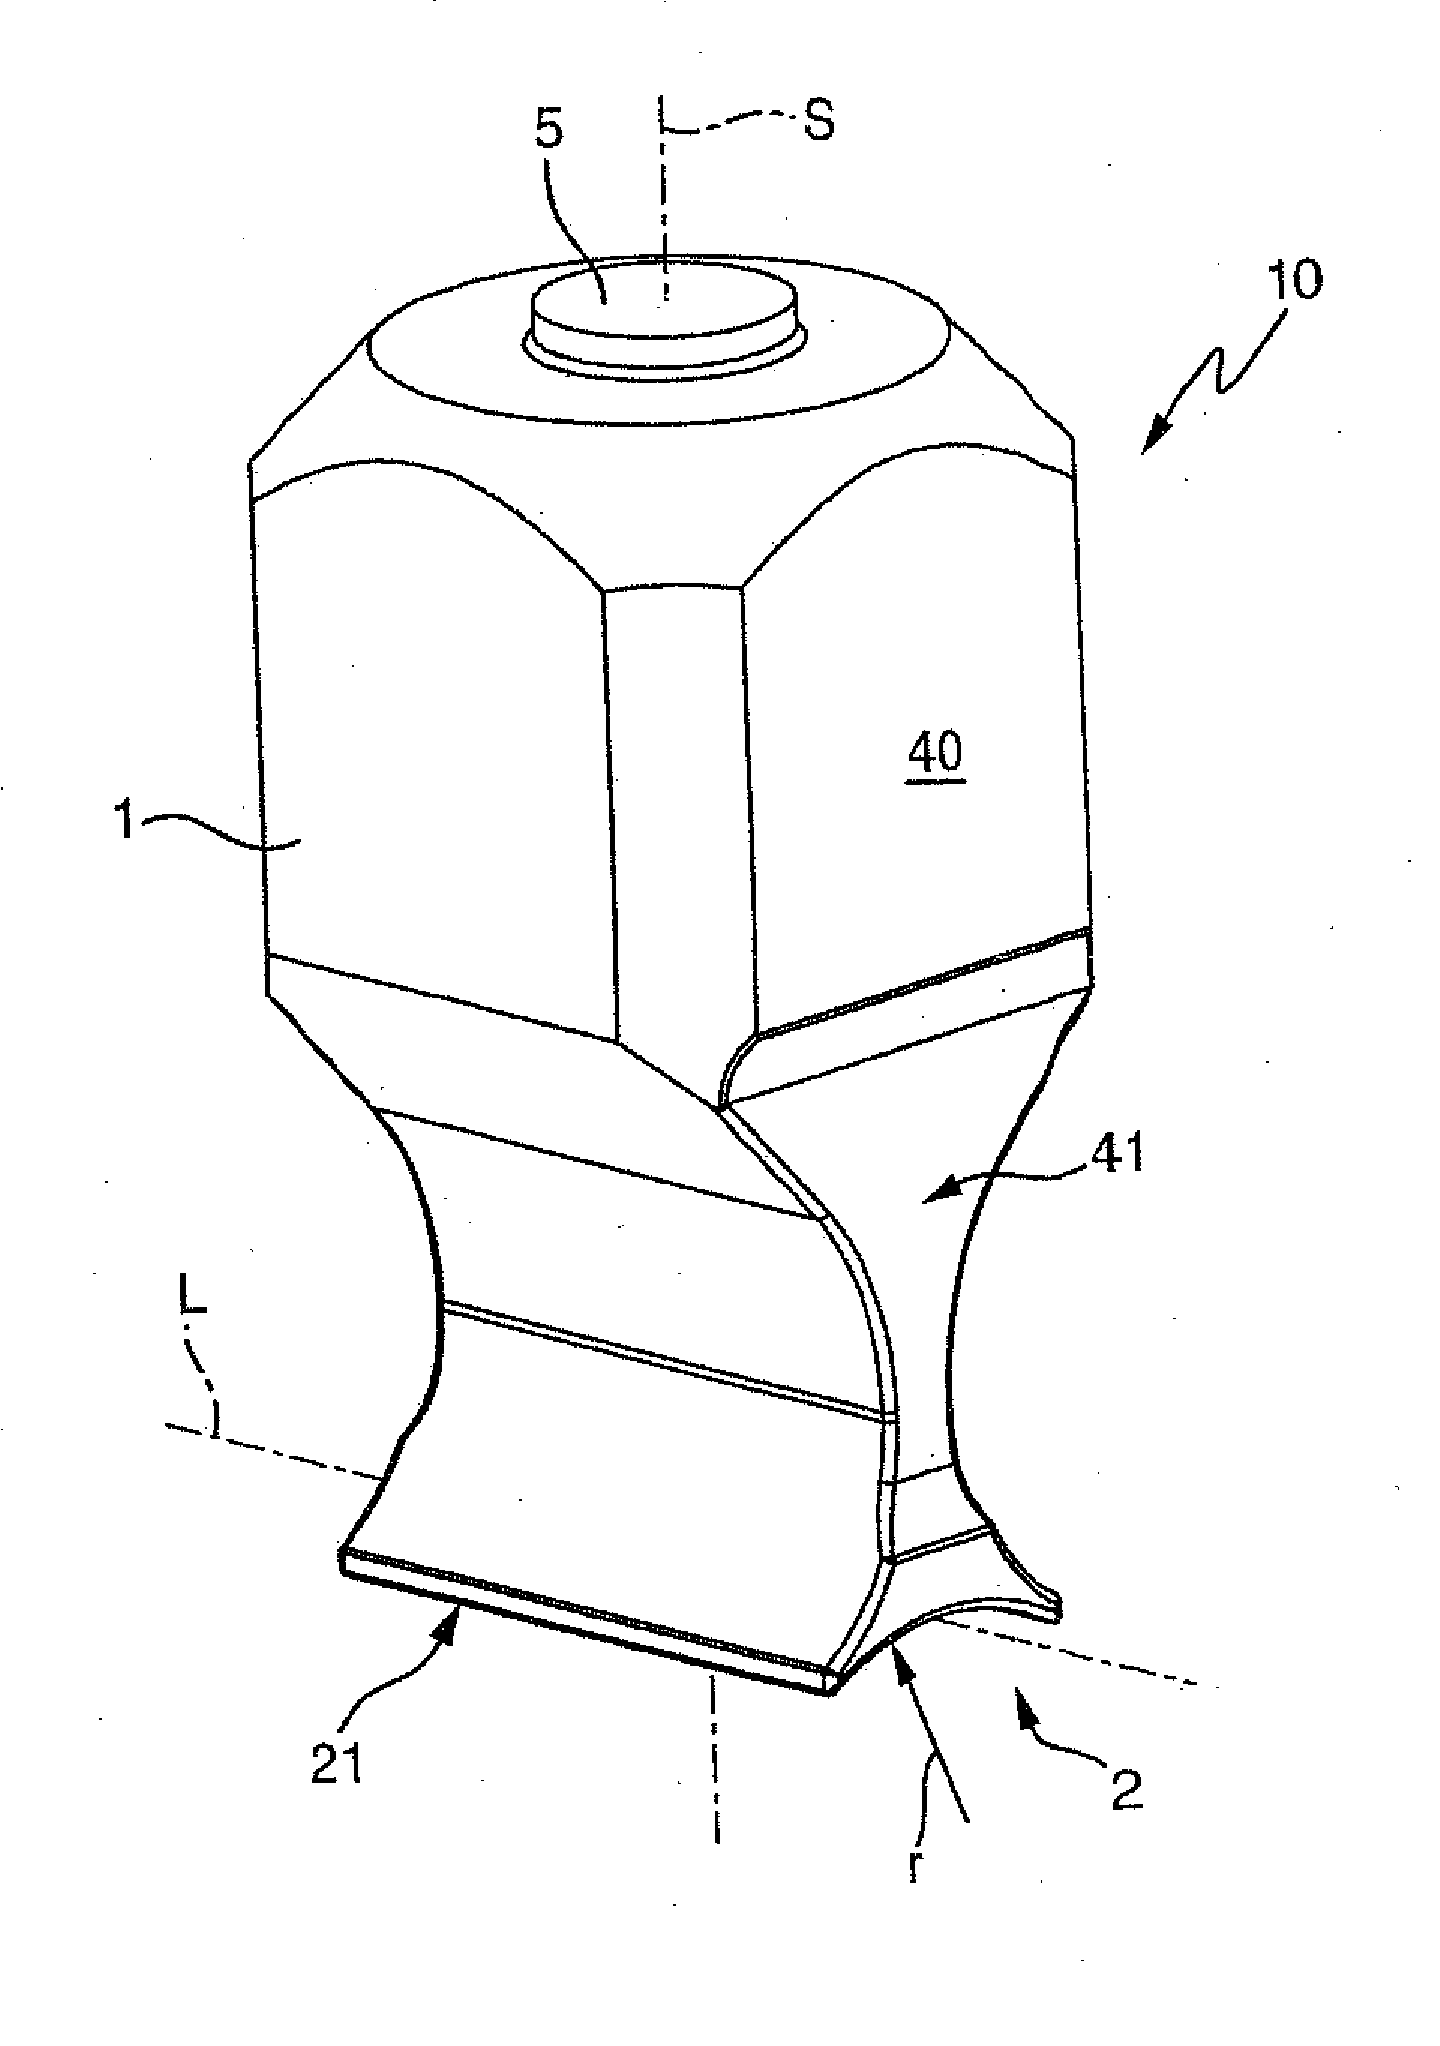 Sonotrode and device for reducing and eliminating foaming of liquid products